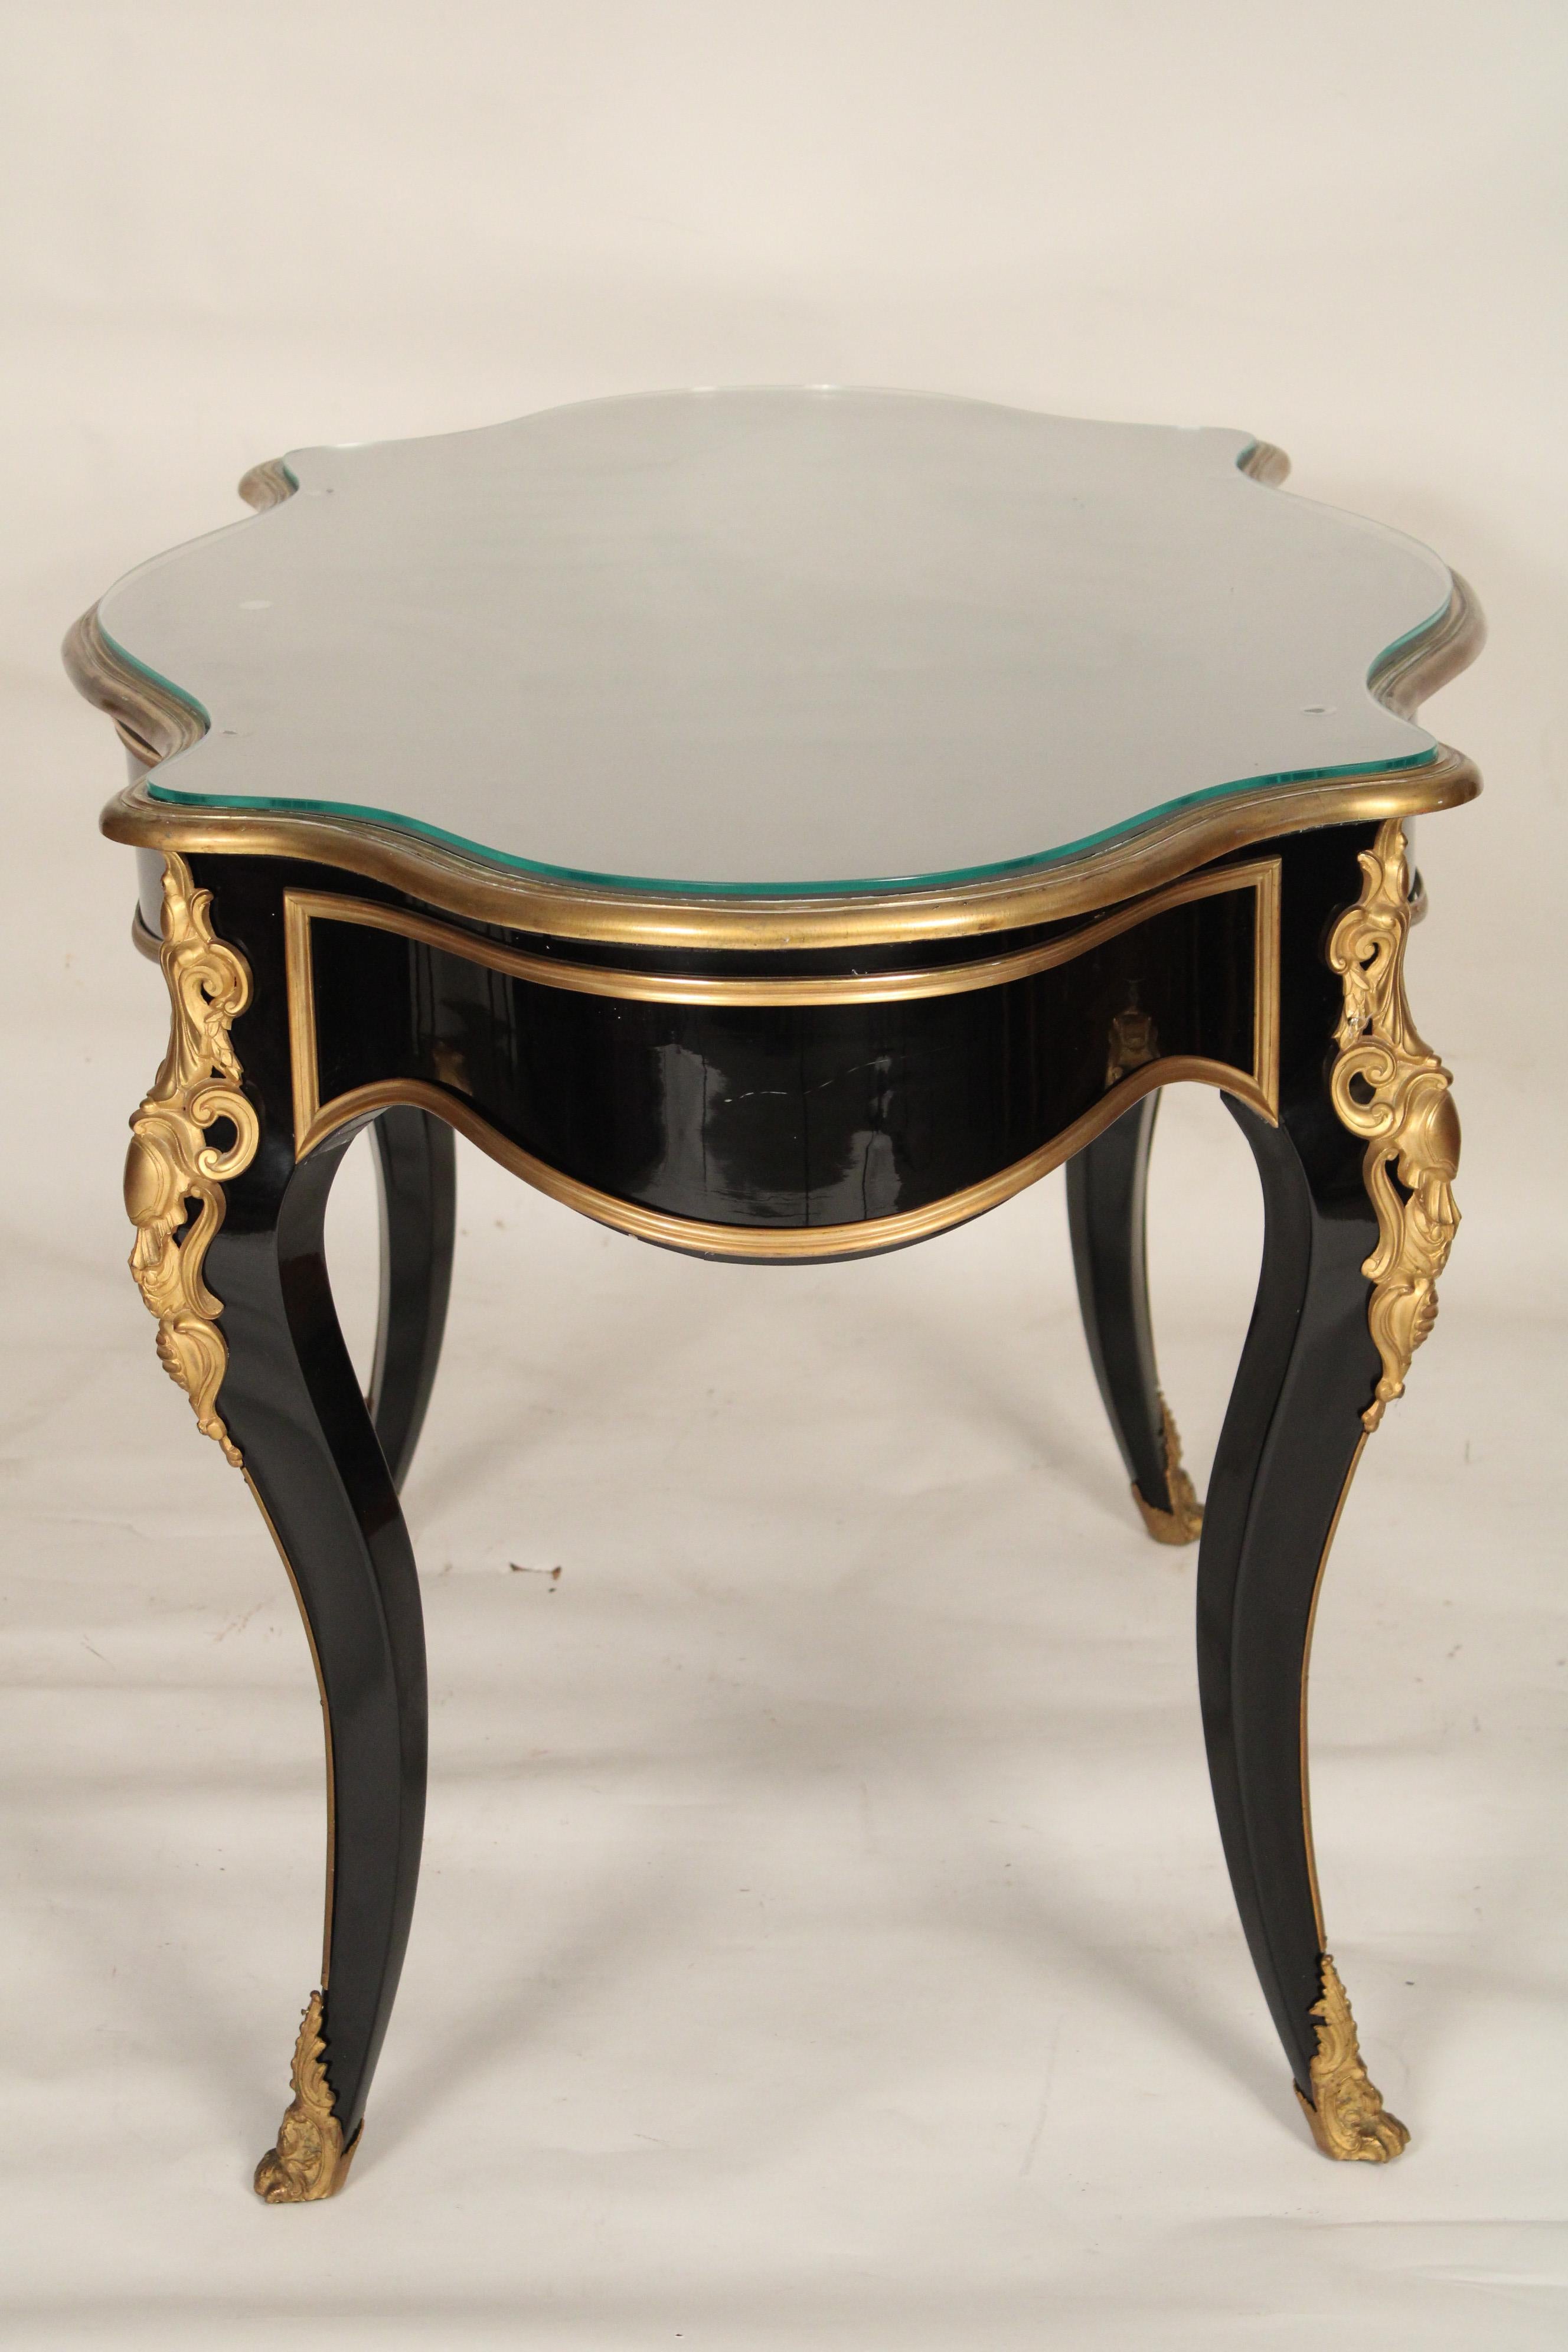 19th Century Napoleon III Black Lacquer and Gilt Bronze Mounted Writing Table / Center Table